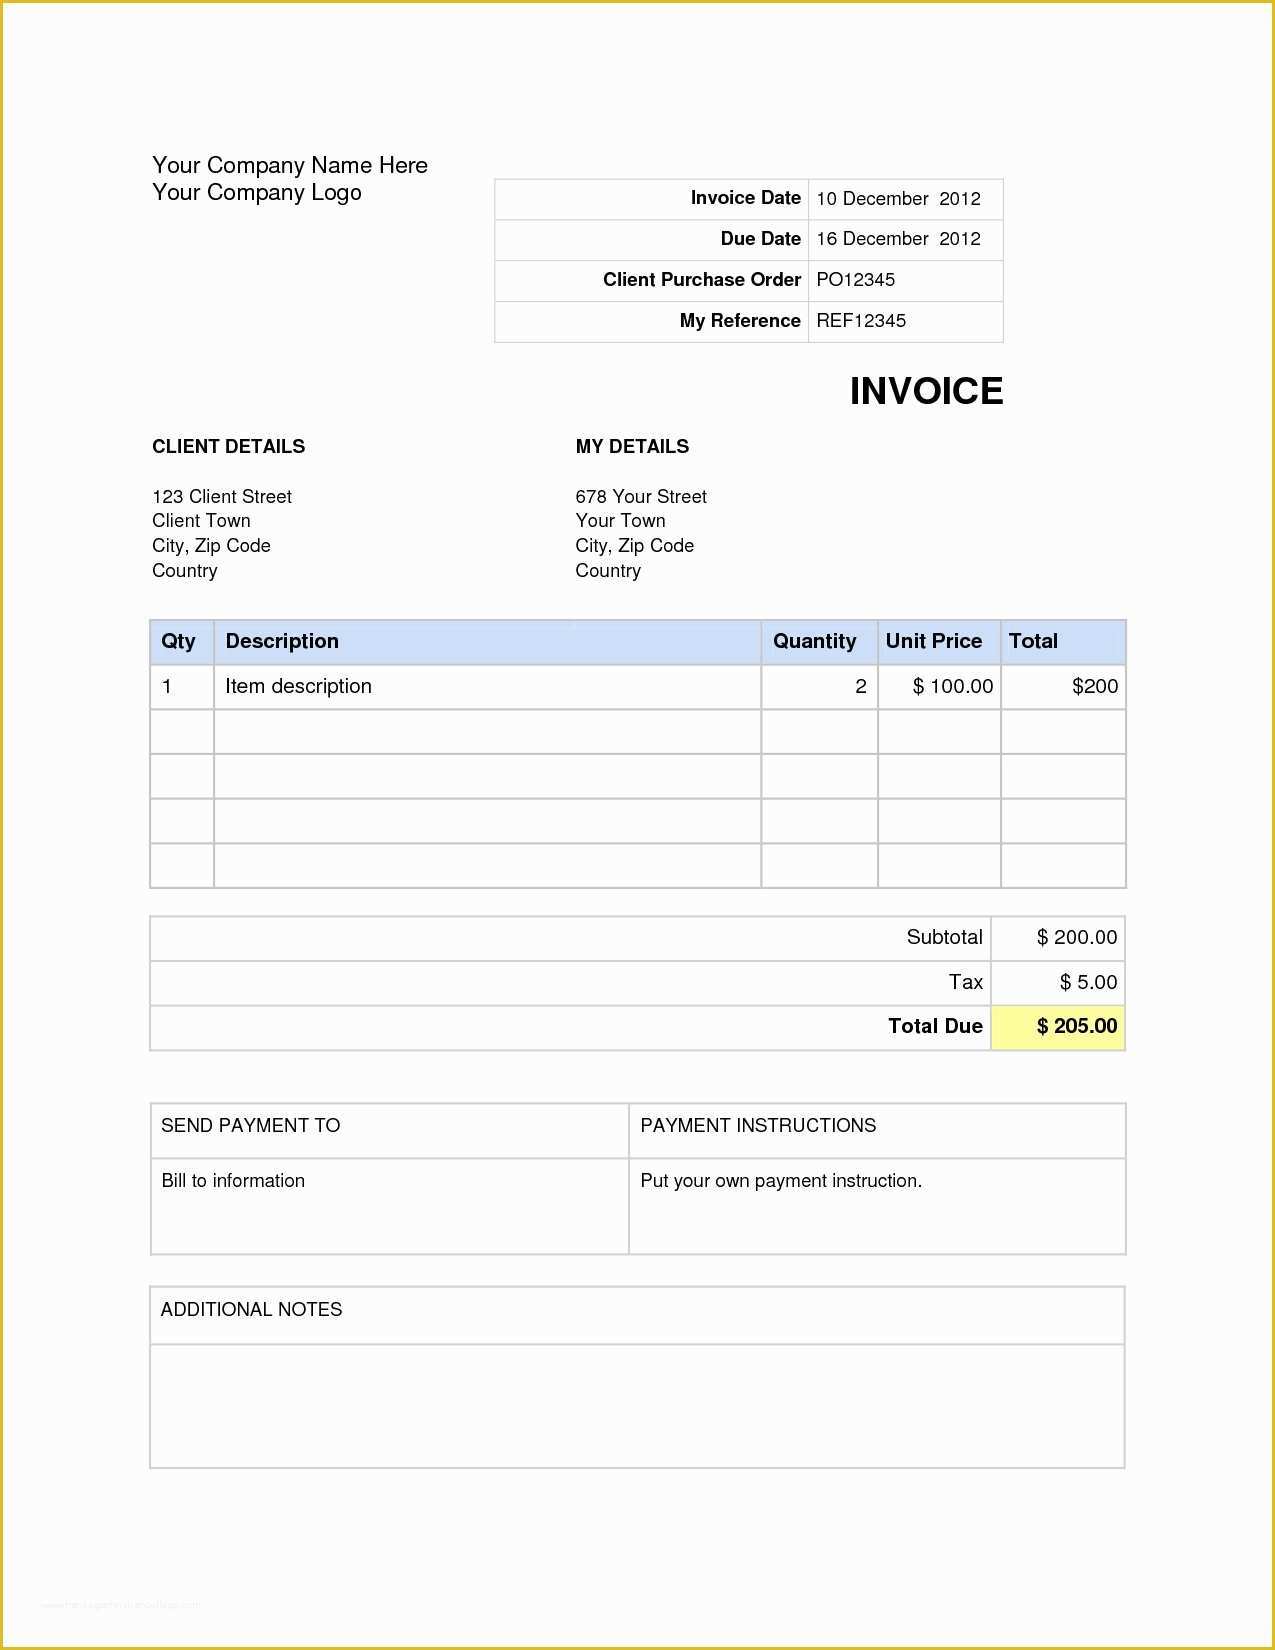 Invoice Template Free Download Windows Of Invoice Template Word 2007 Free Download – Templates Free